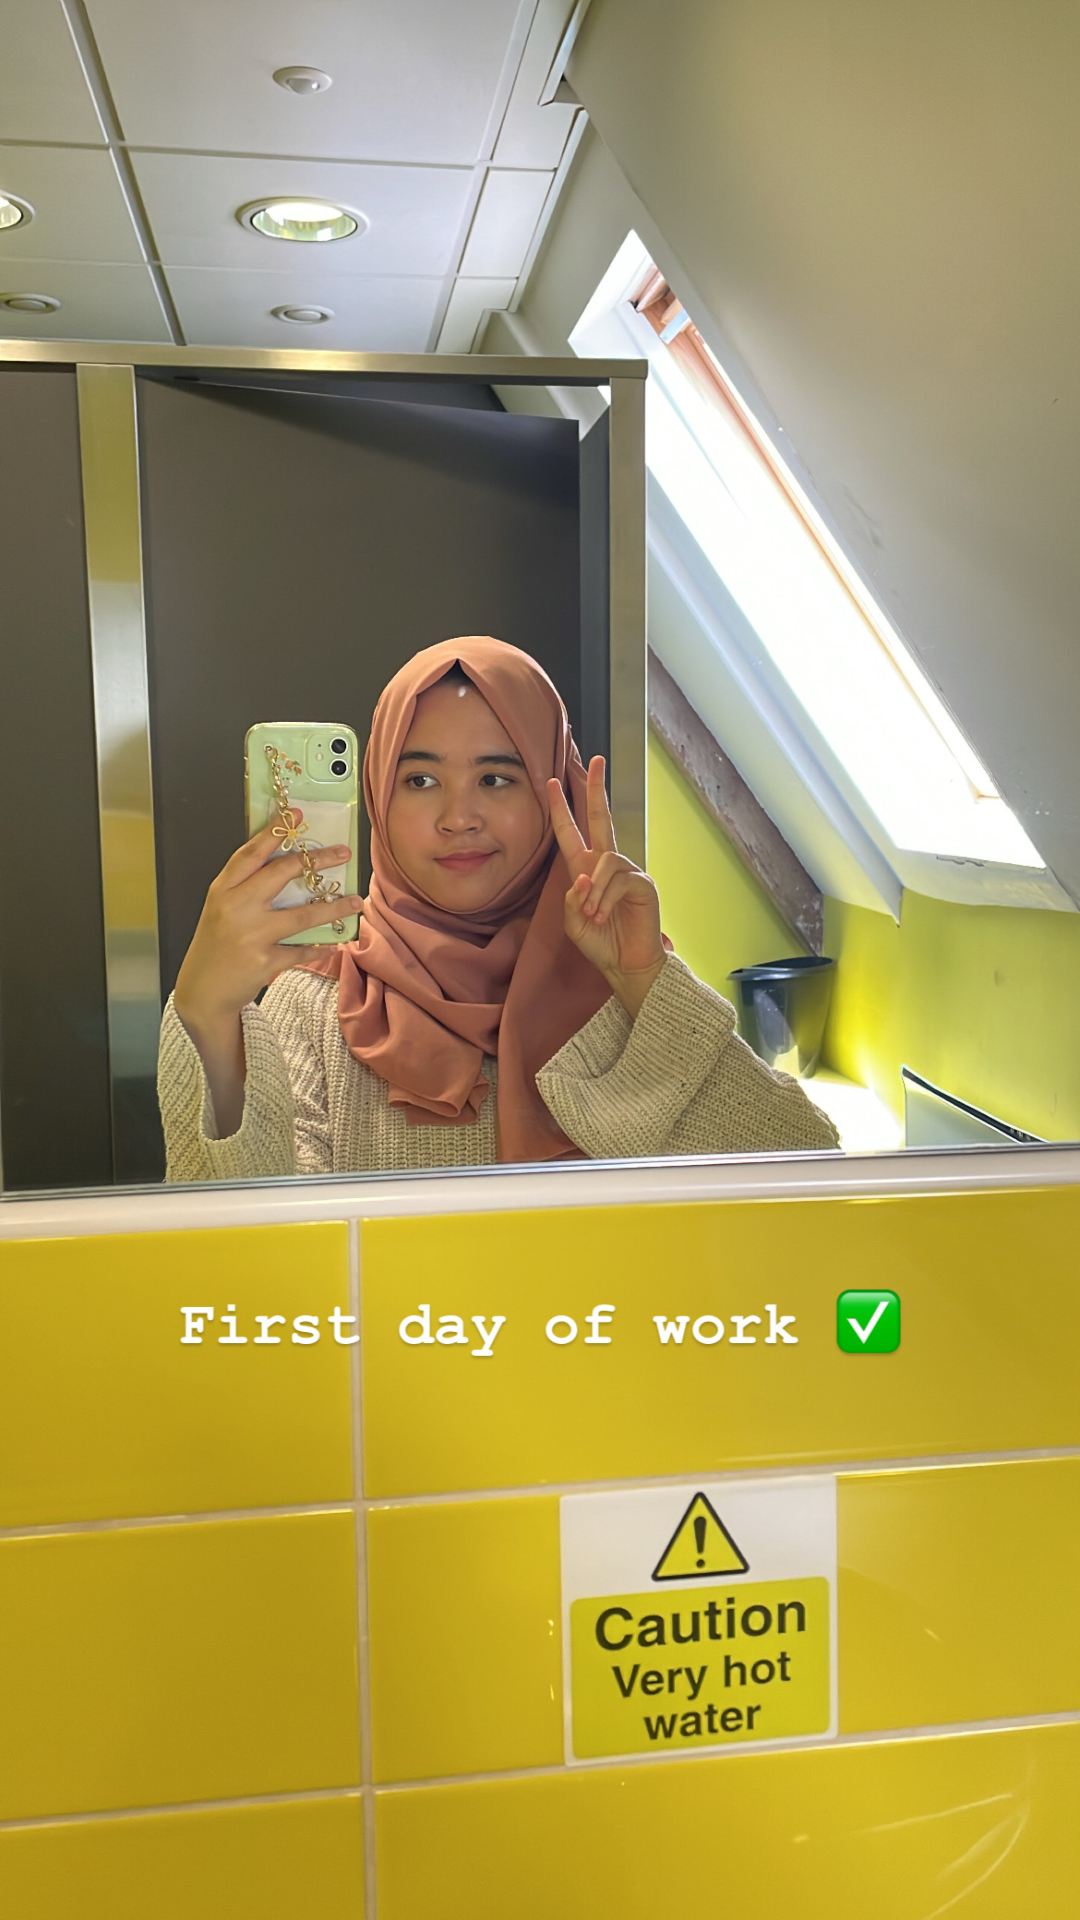 Jasmine taking a selfie, smiling. Reads 'First day of work.'